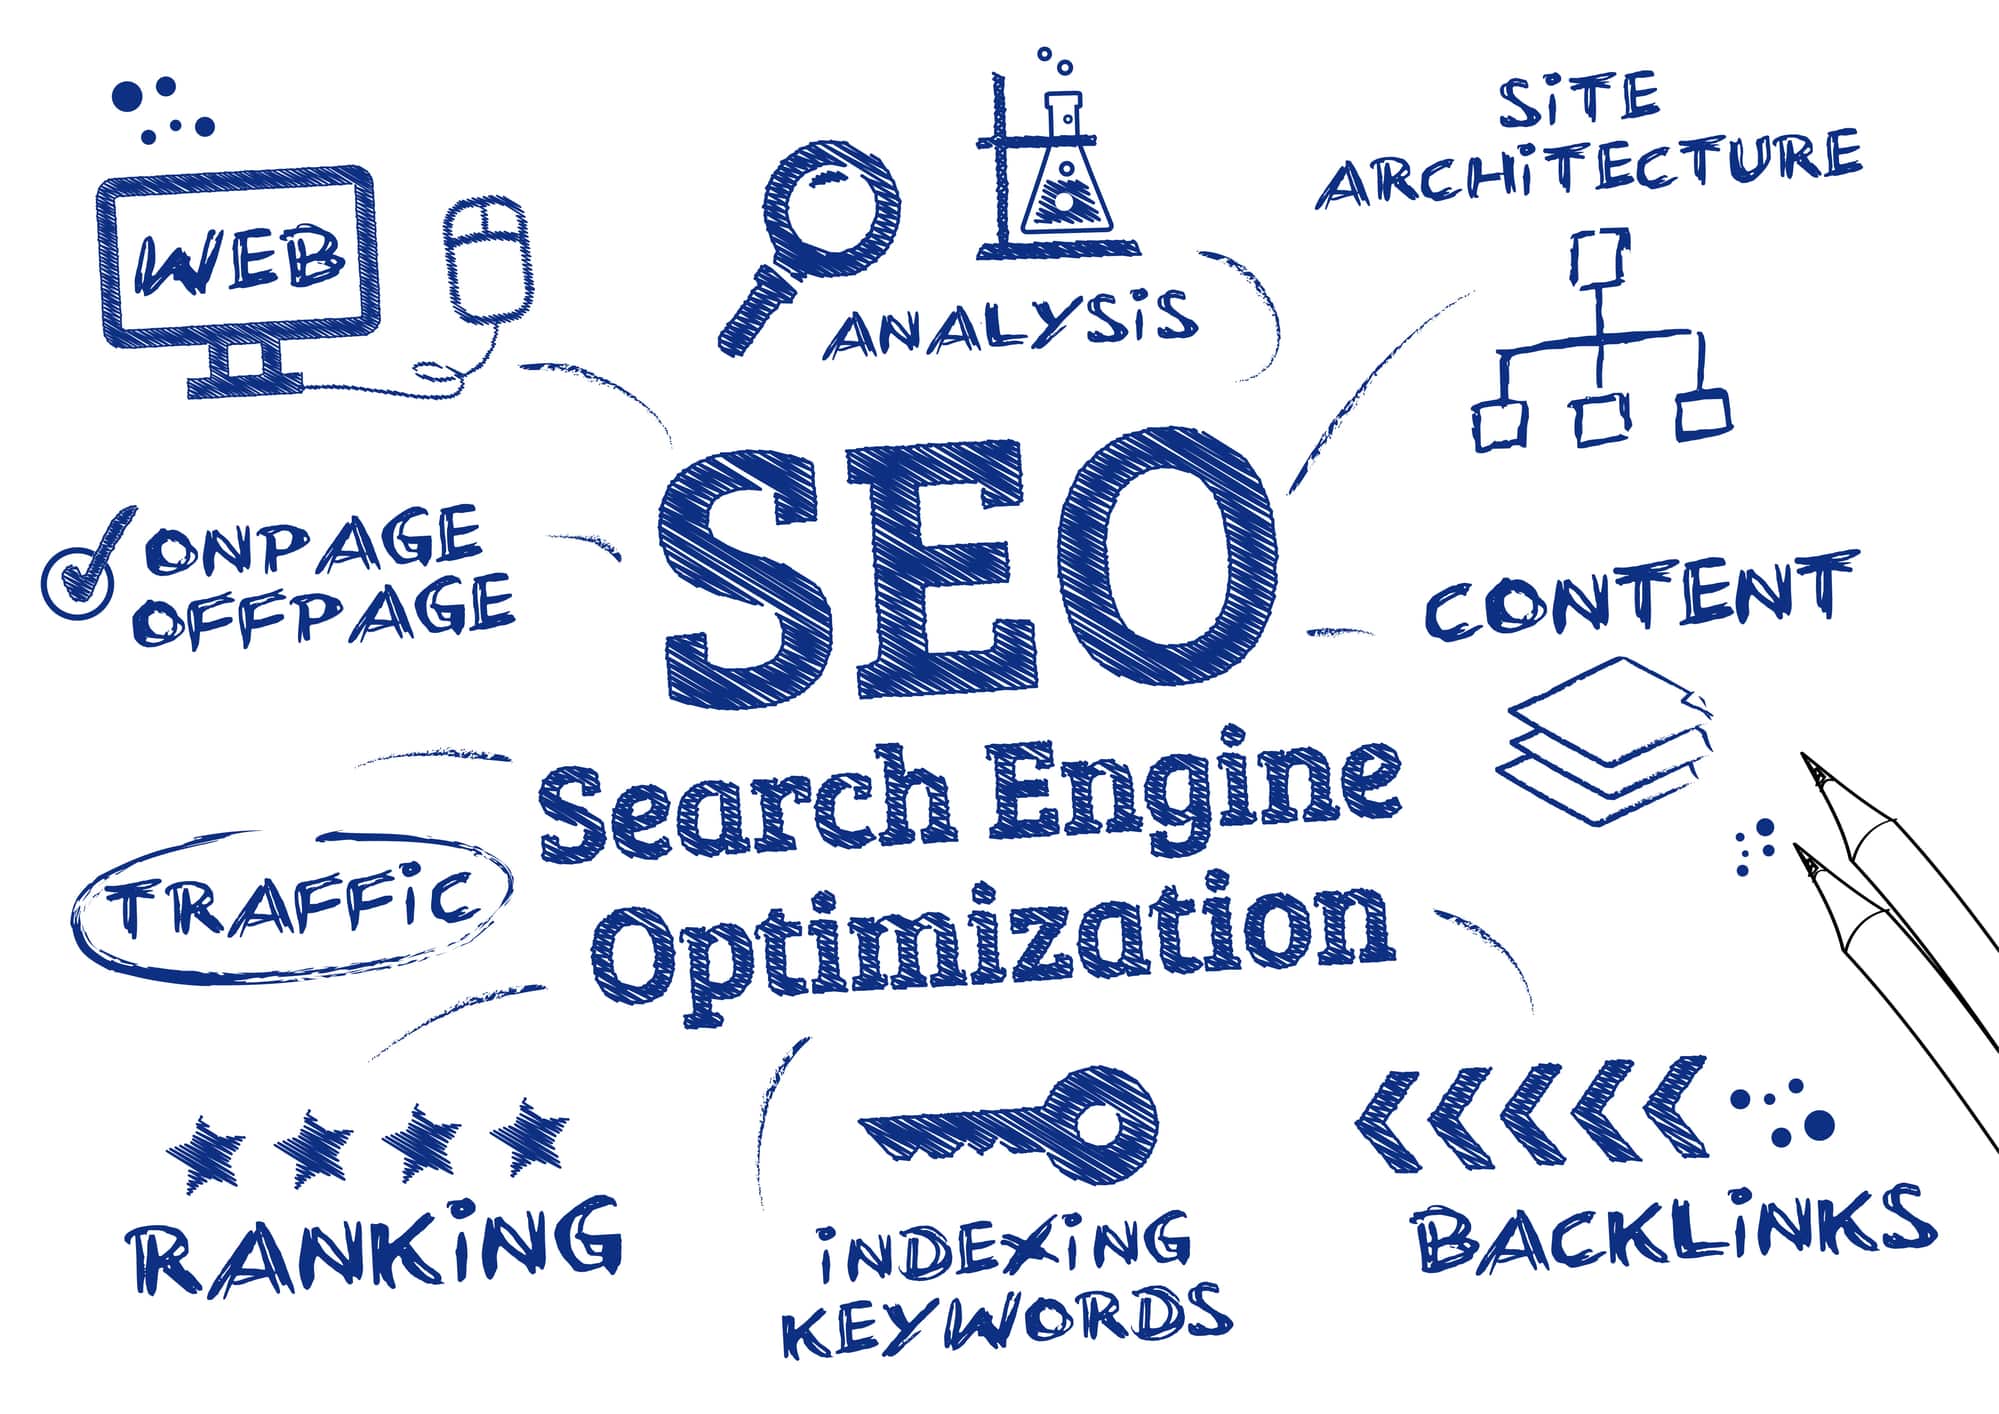 Optimizing for Search Engines